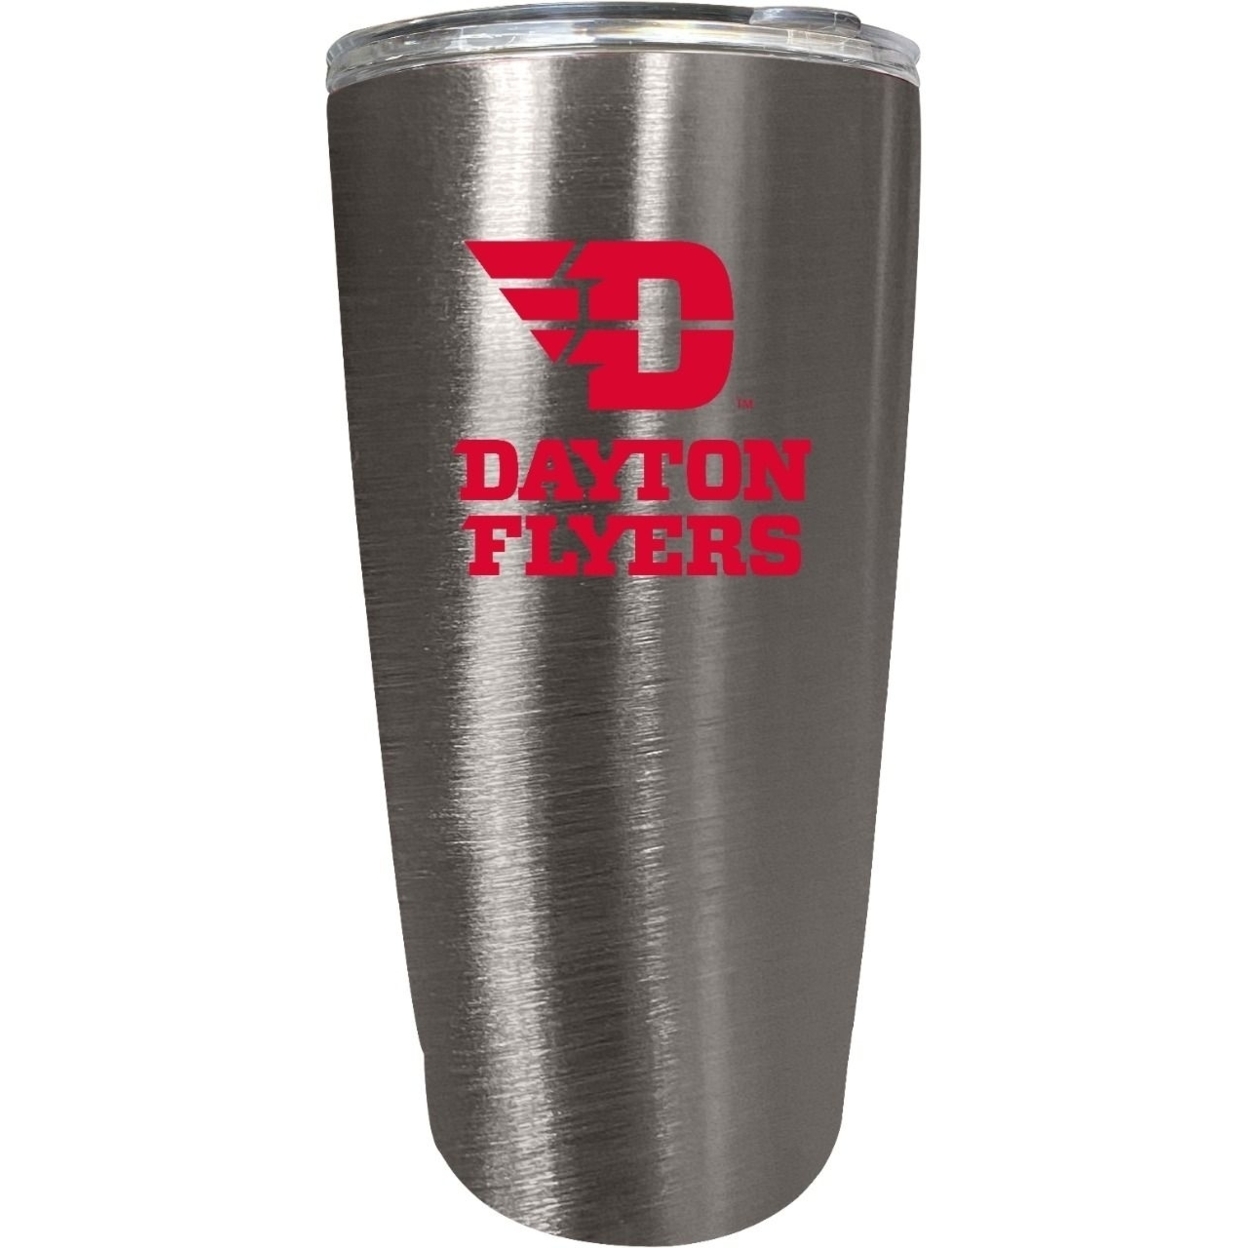 Dayton Flyers 16 Oz Insulated Stainless Steel Tumbler Colorless